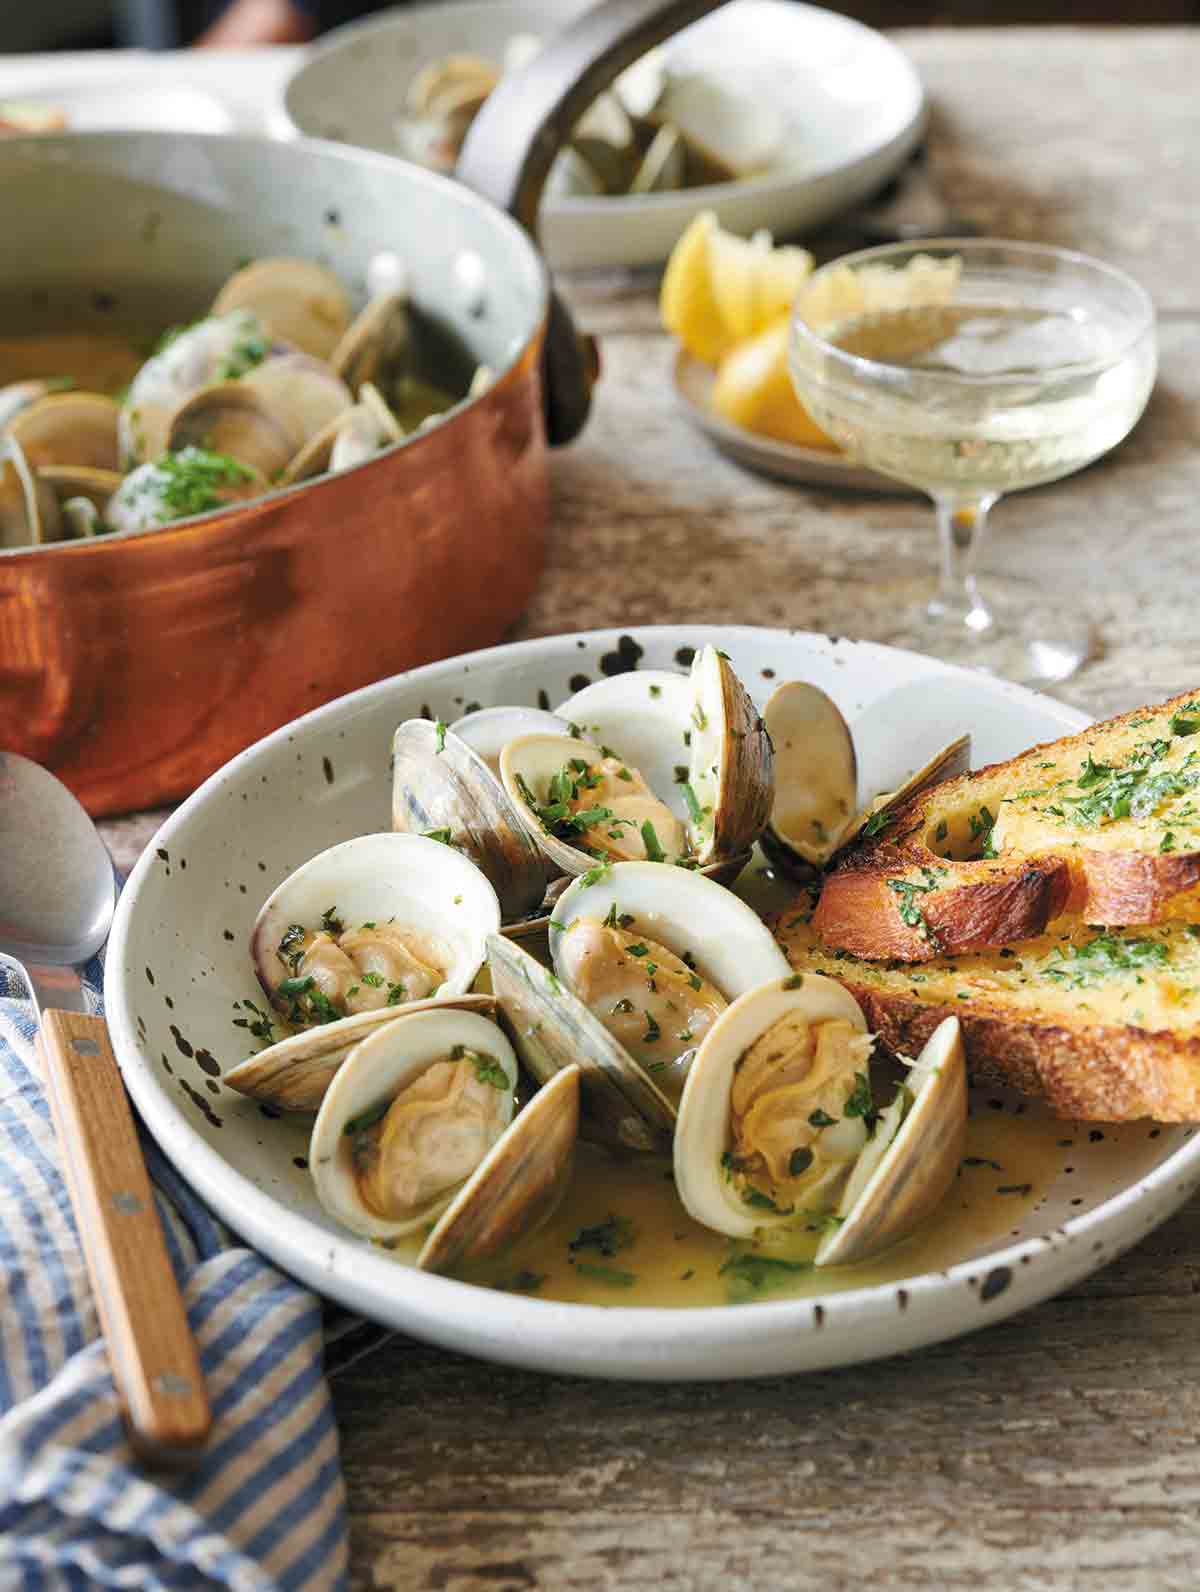 A white speckled bowl filled with opened clams with butter and parsley, and two sourdough toasts on the side of the bowl.